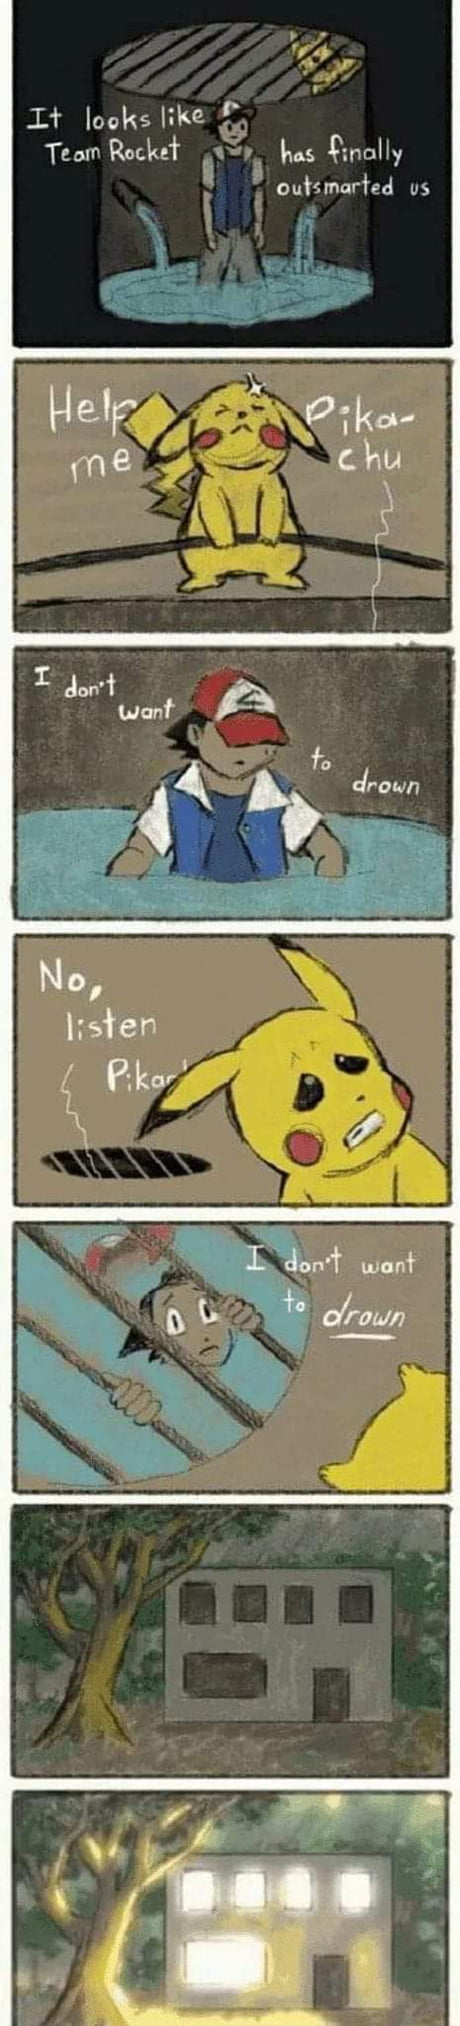 Another funny run withnot so good pokemon except onix, he was terrible. -  9GAG